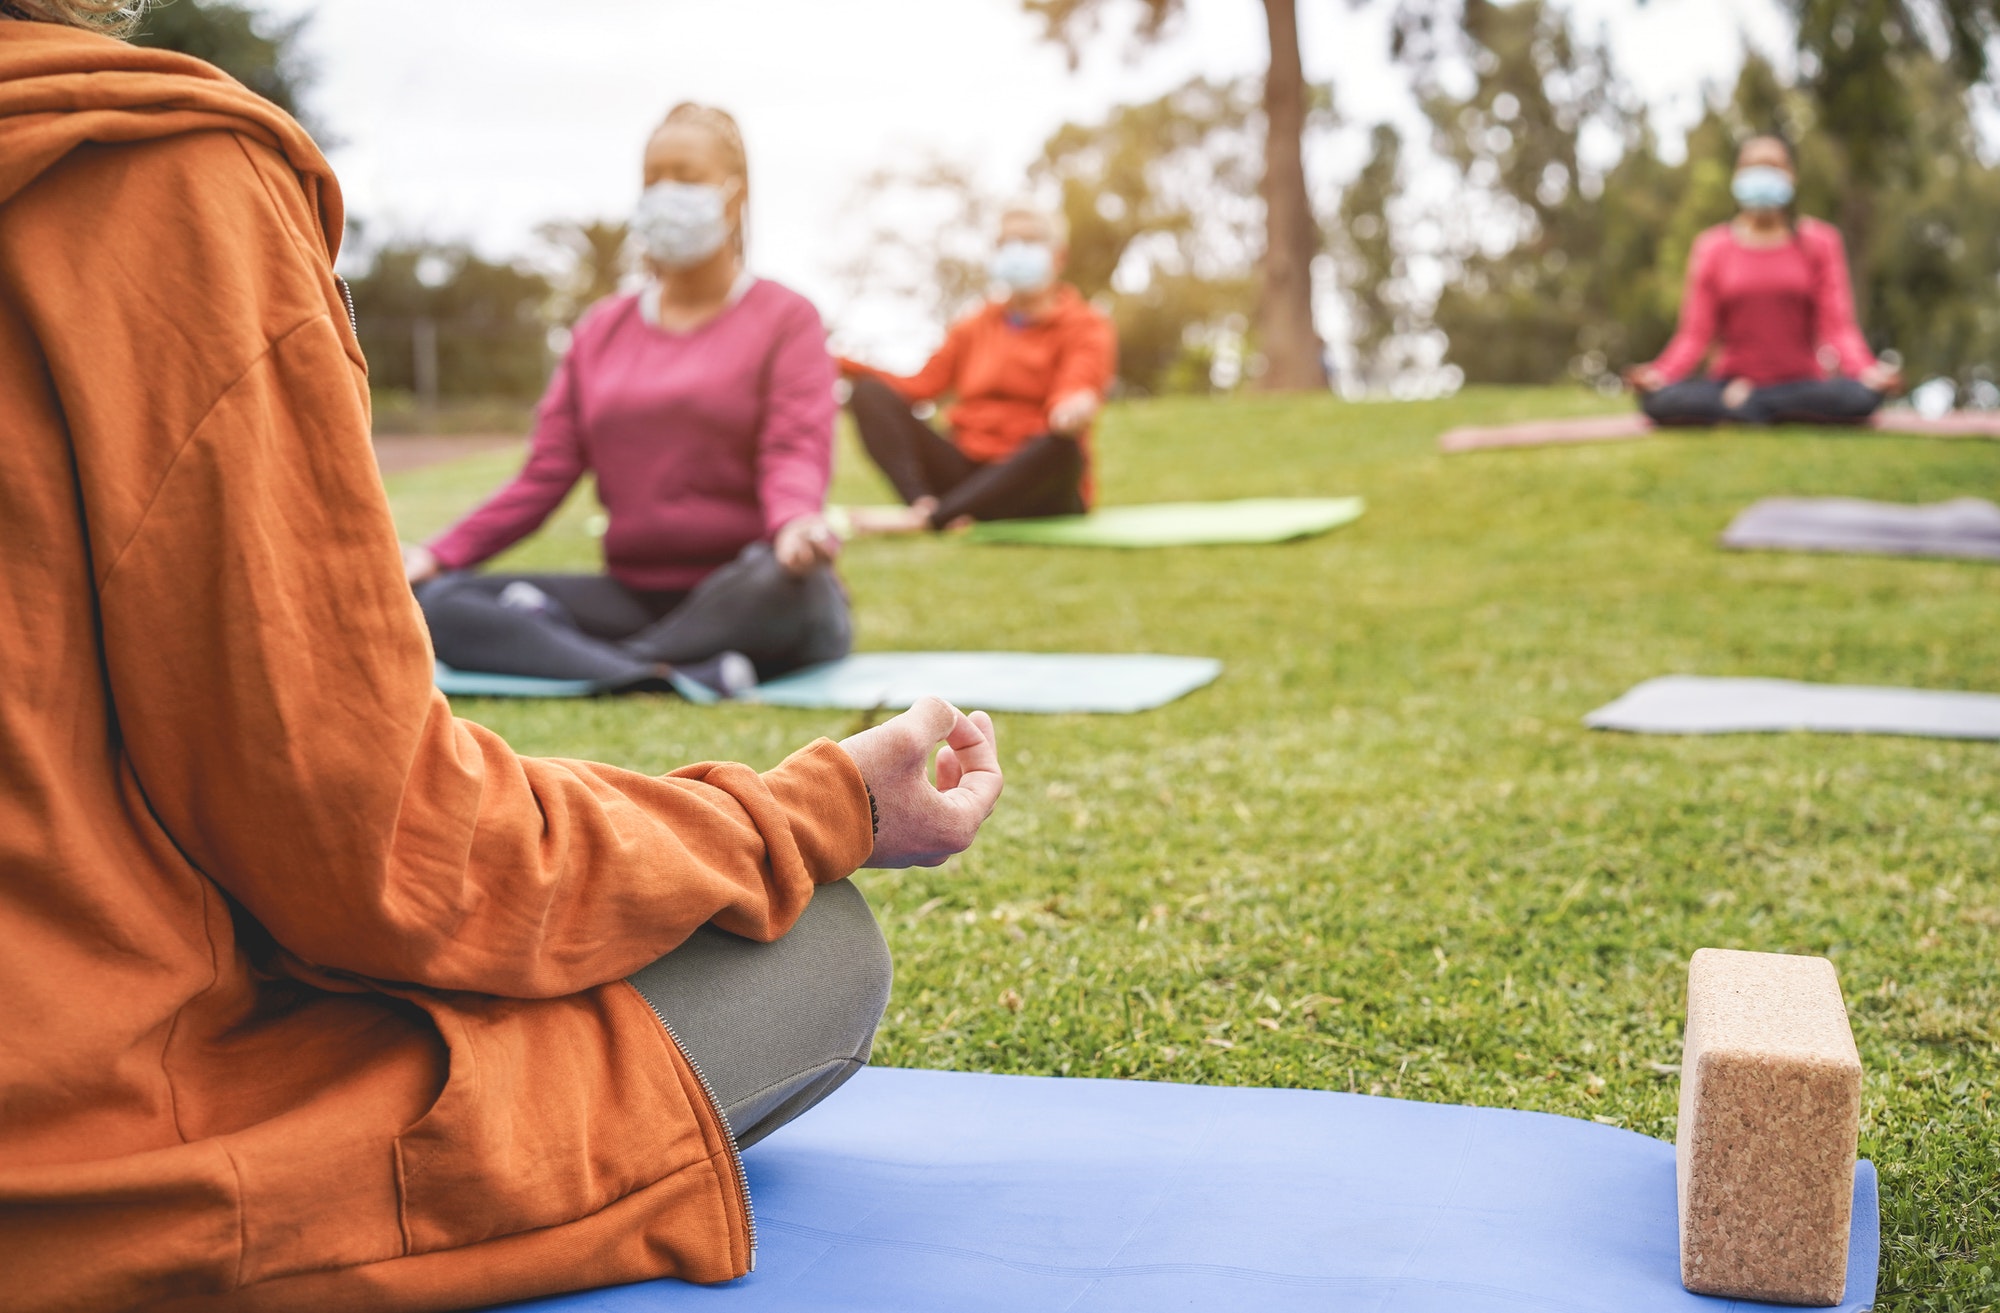 People doing yoga class outdoor sitting on grass while wearing safesty masks